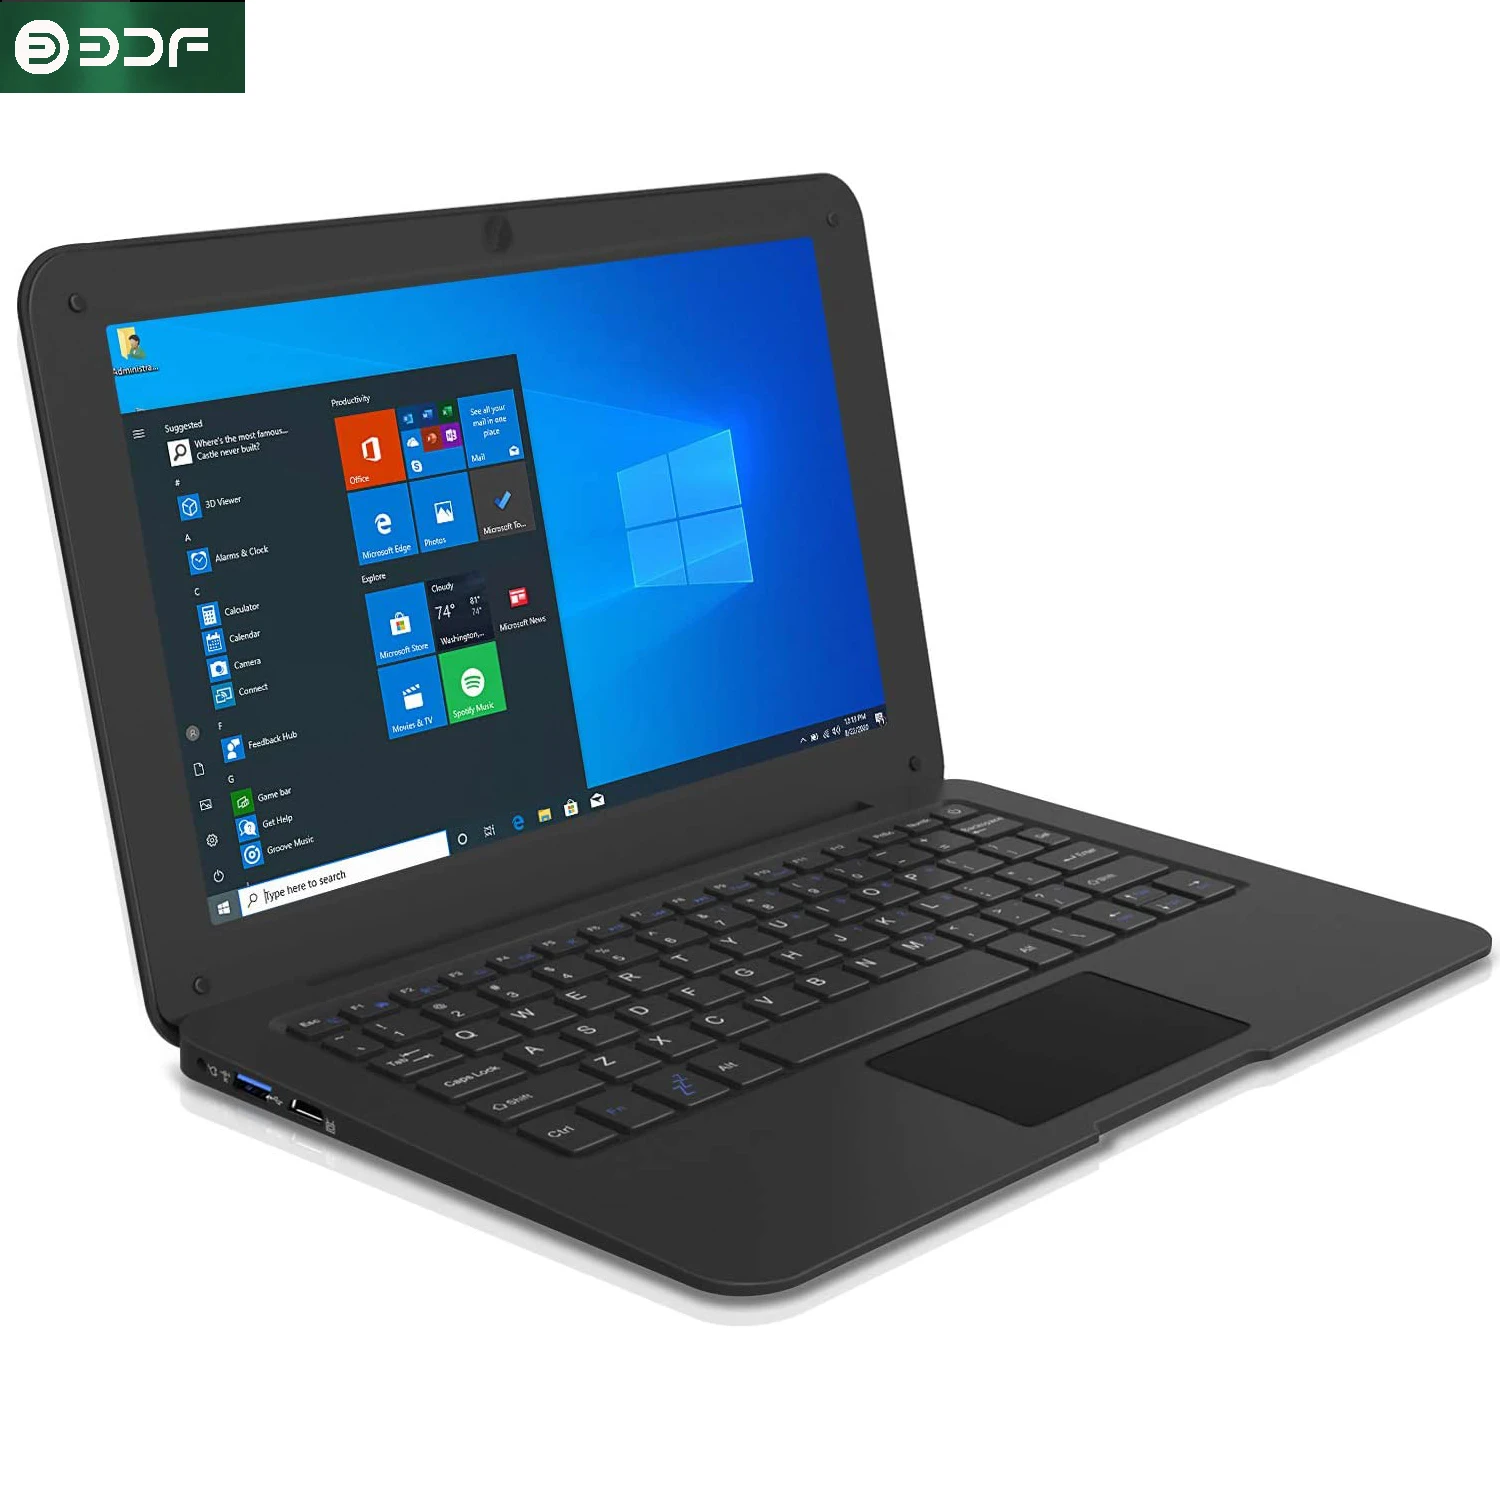 10.1Inch Portable Laptop Mini Computer Ultra Thin Notebook with Intel Atom N3330 6GB RAM and 64GB Storage with Windows10 OS